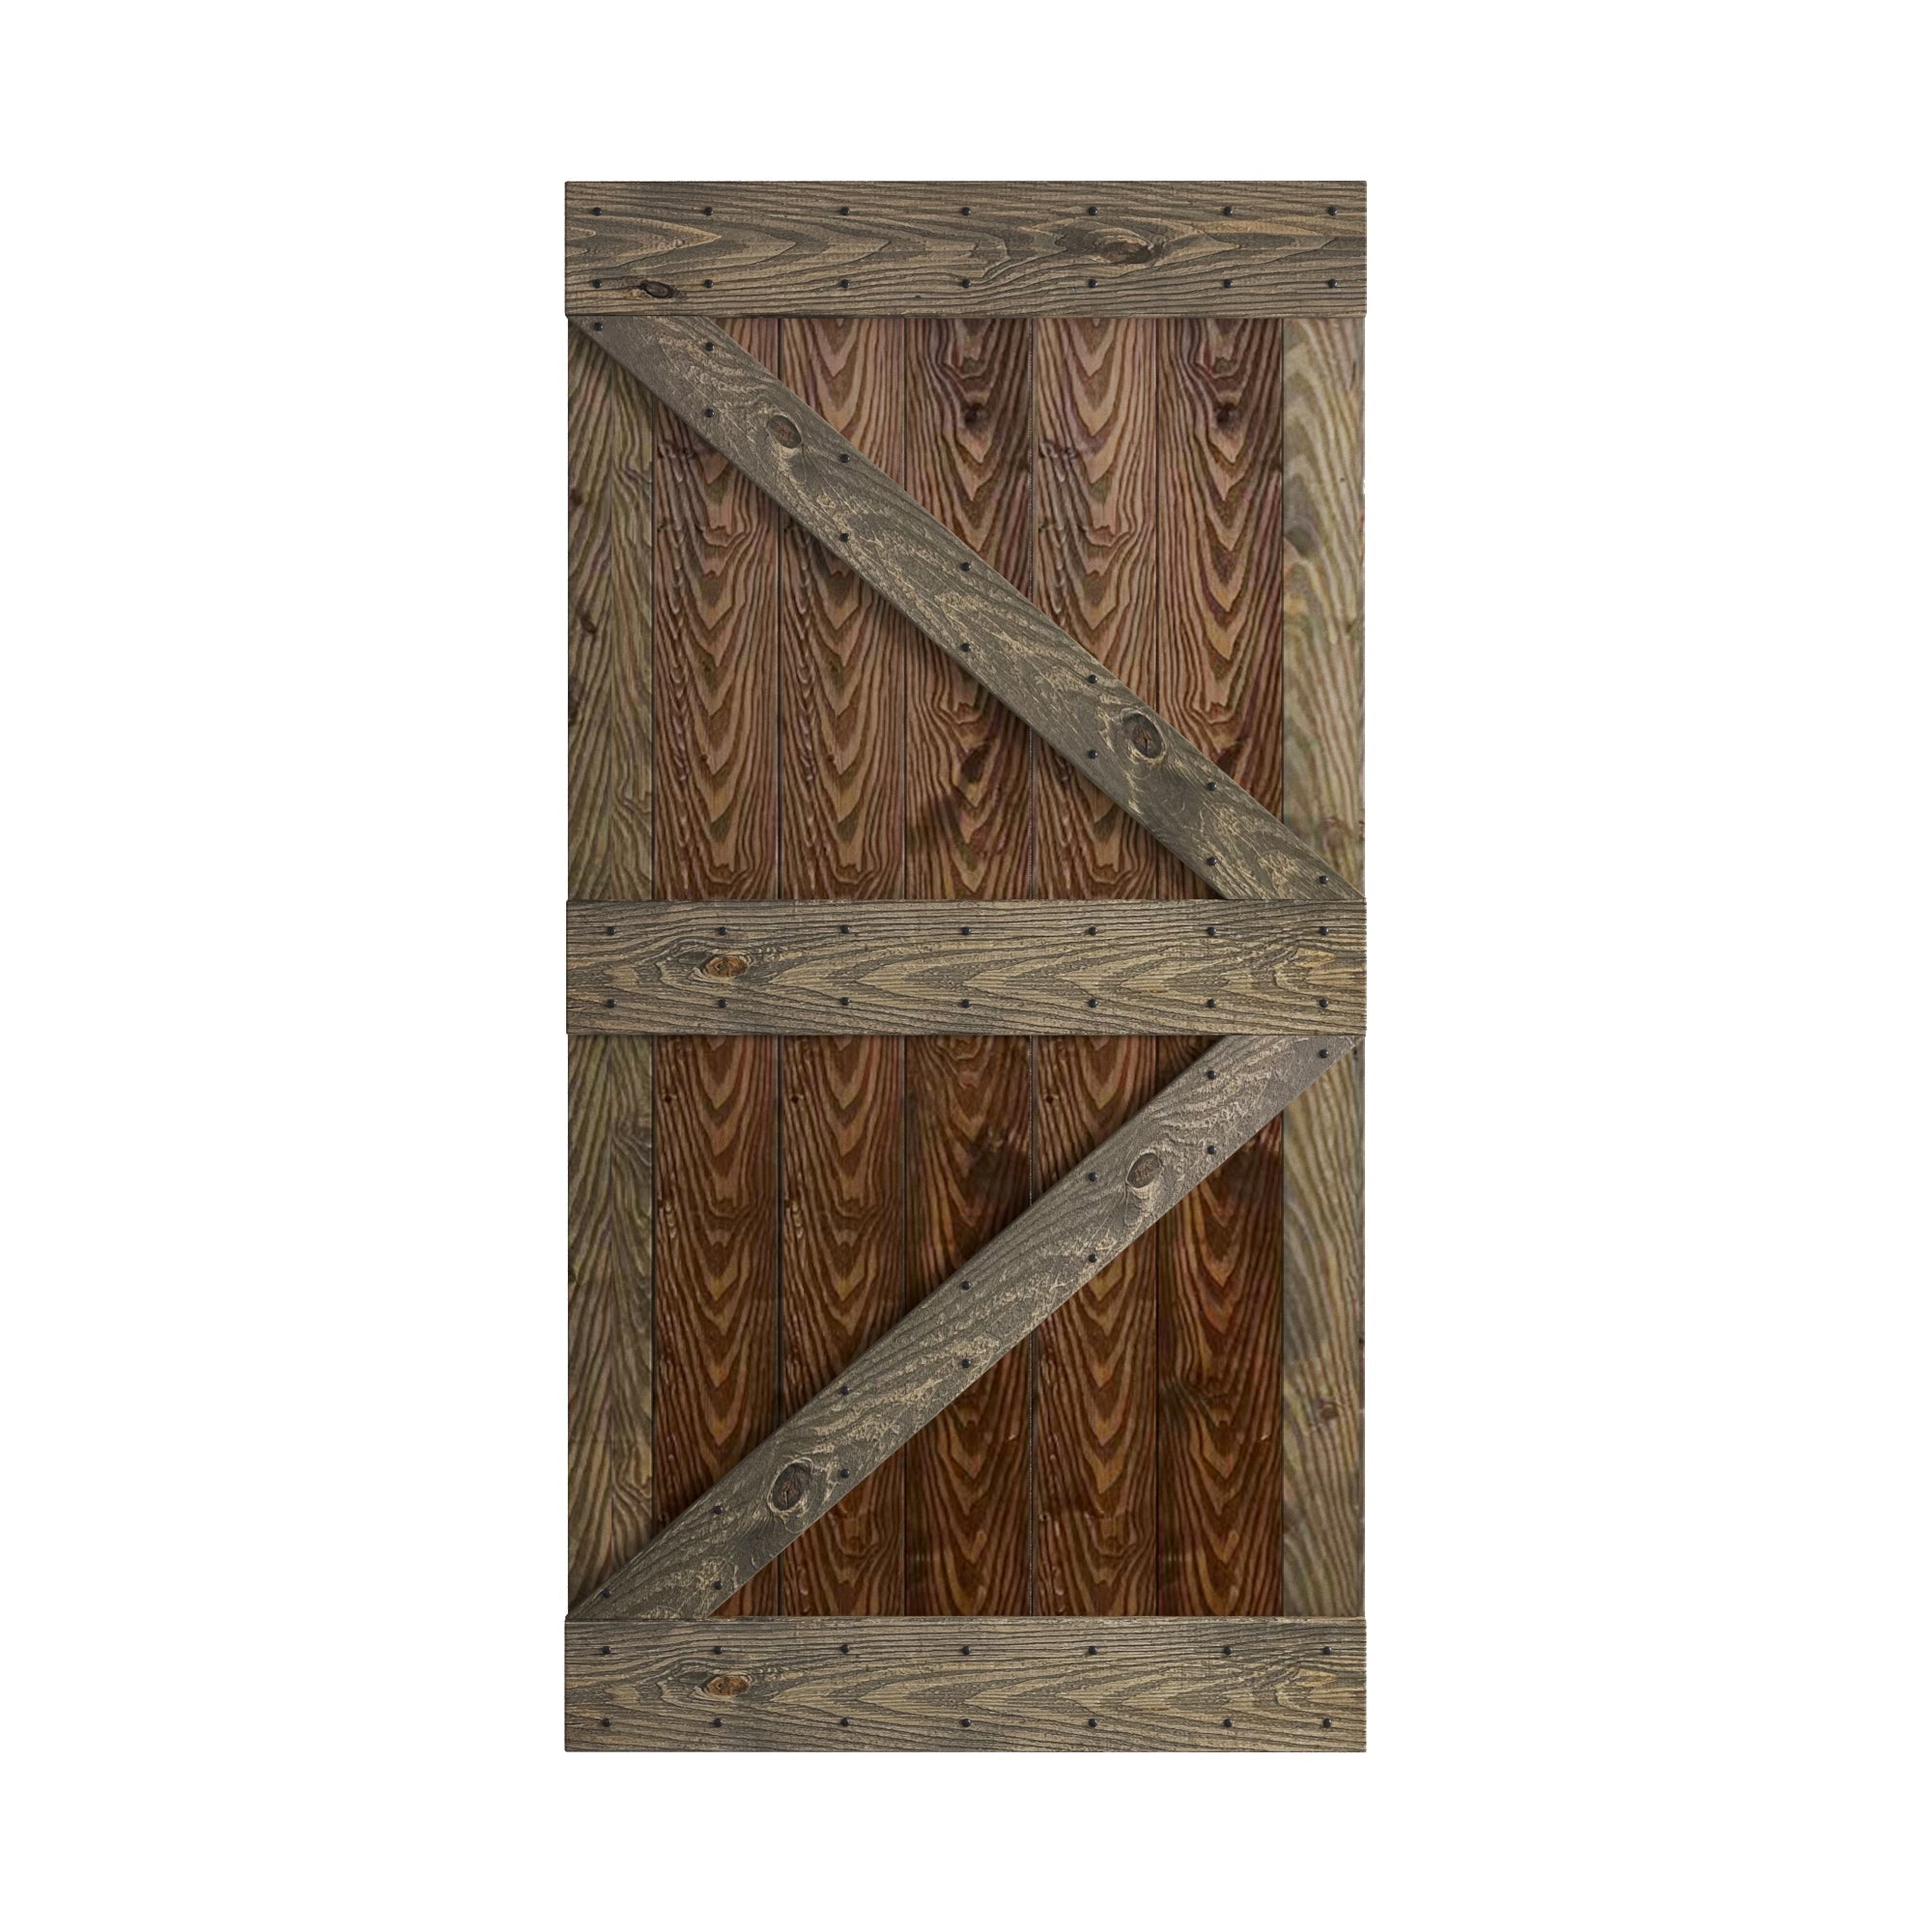 24in/30in/36in/42in x 84in K Series Embossing Knotty Wood Sliding Barn Door Without Hardware Kit